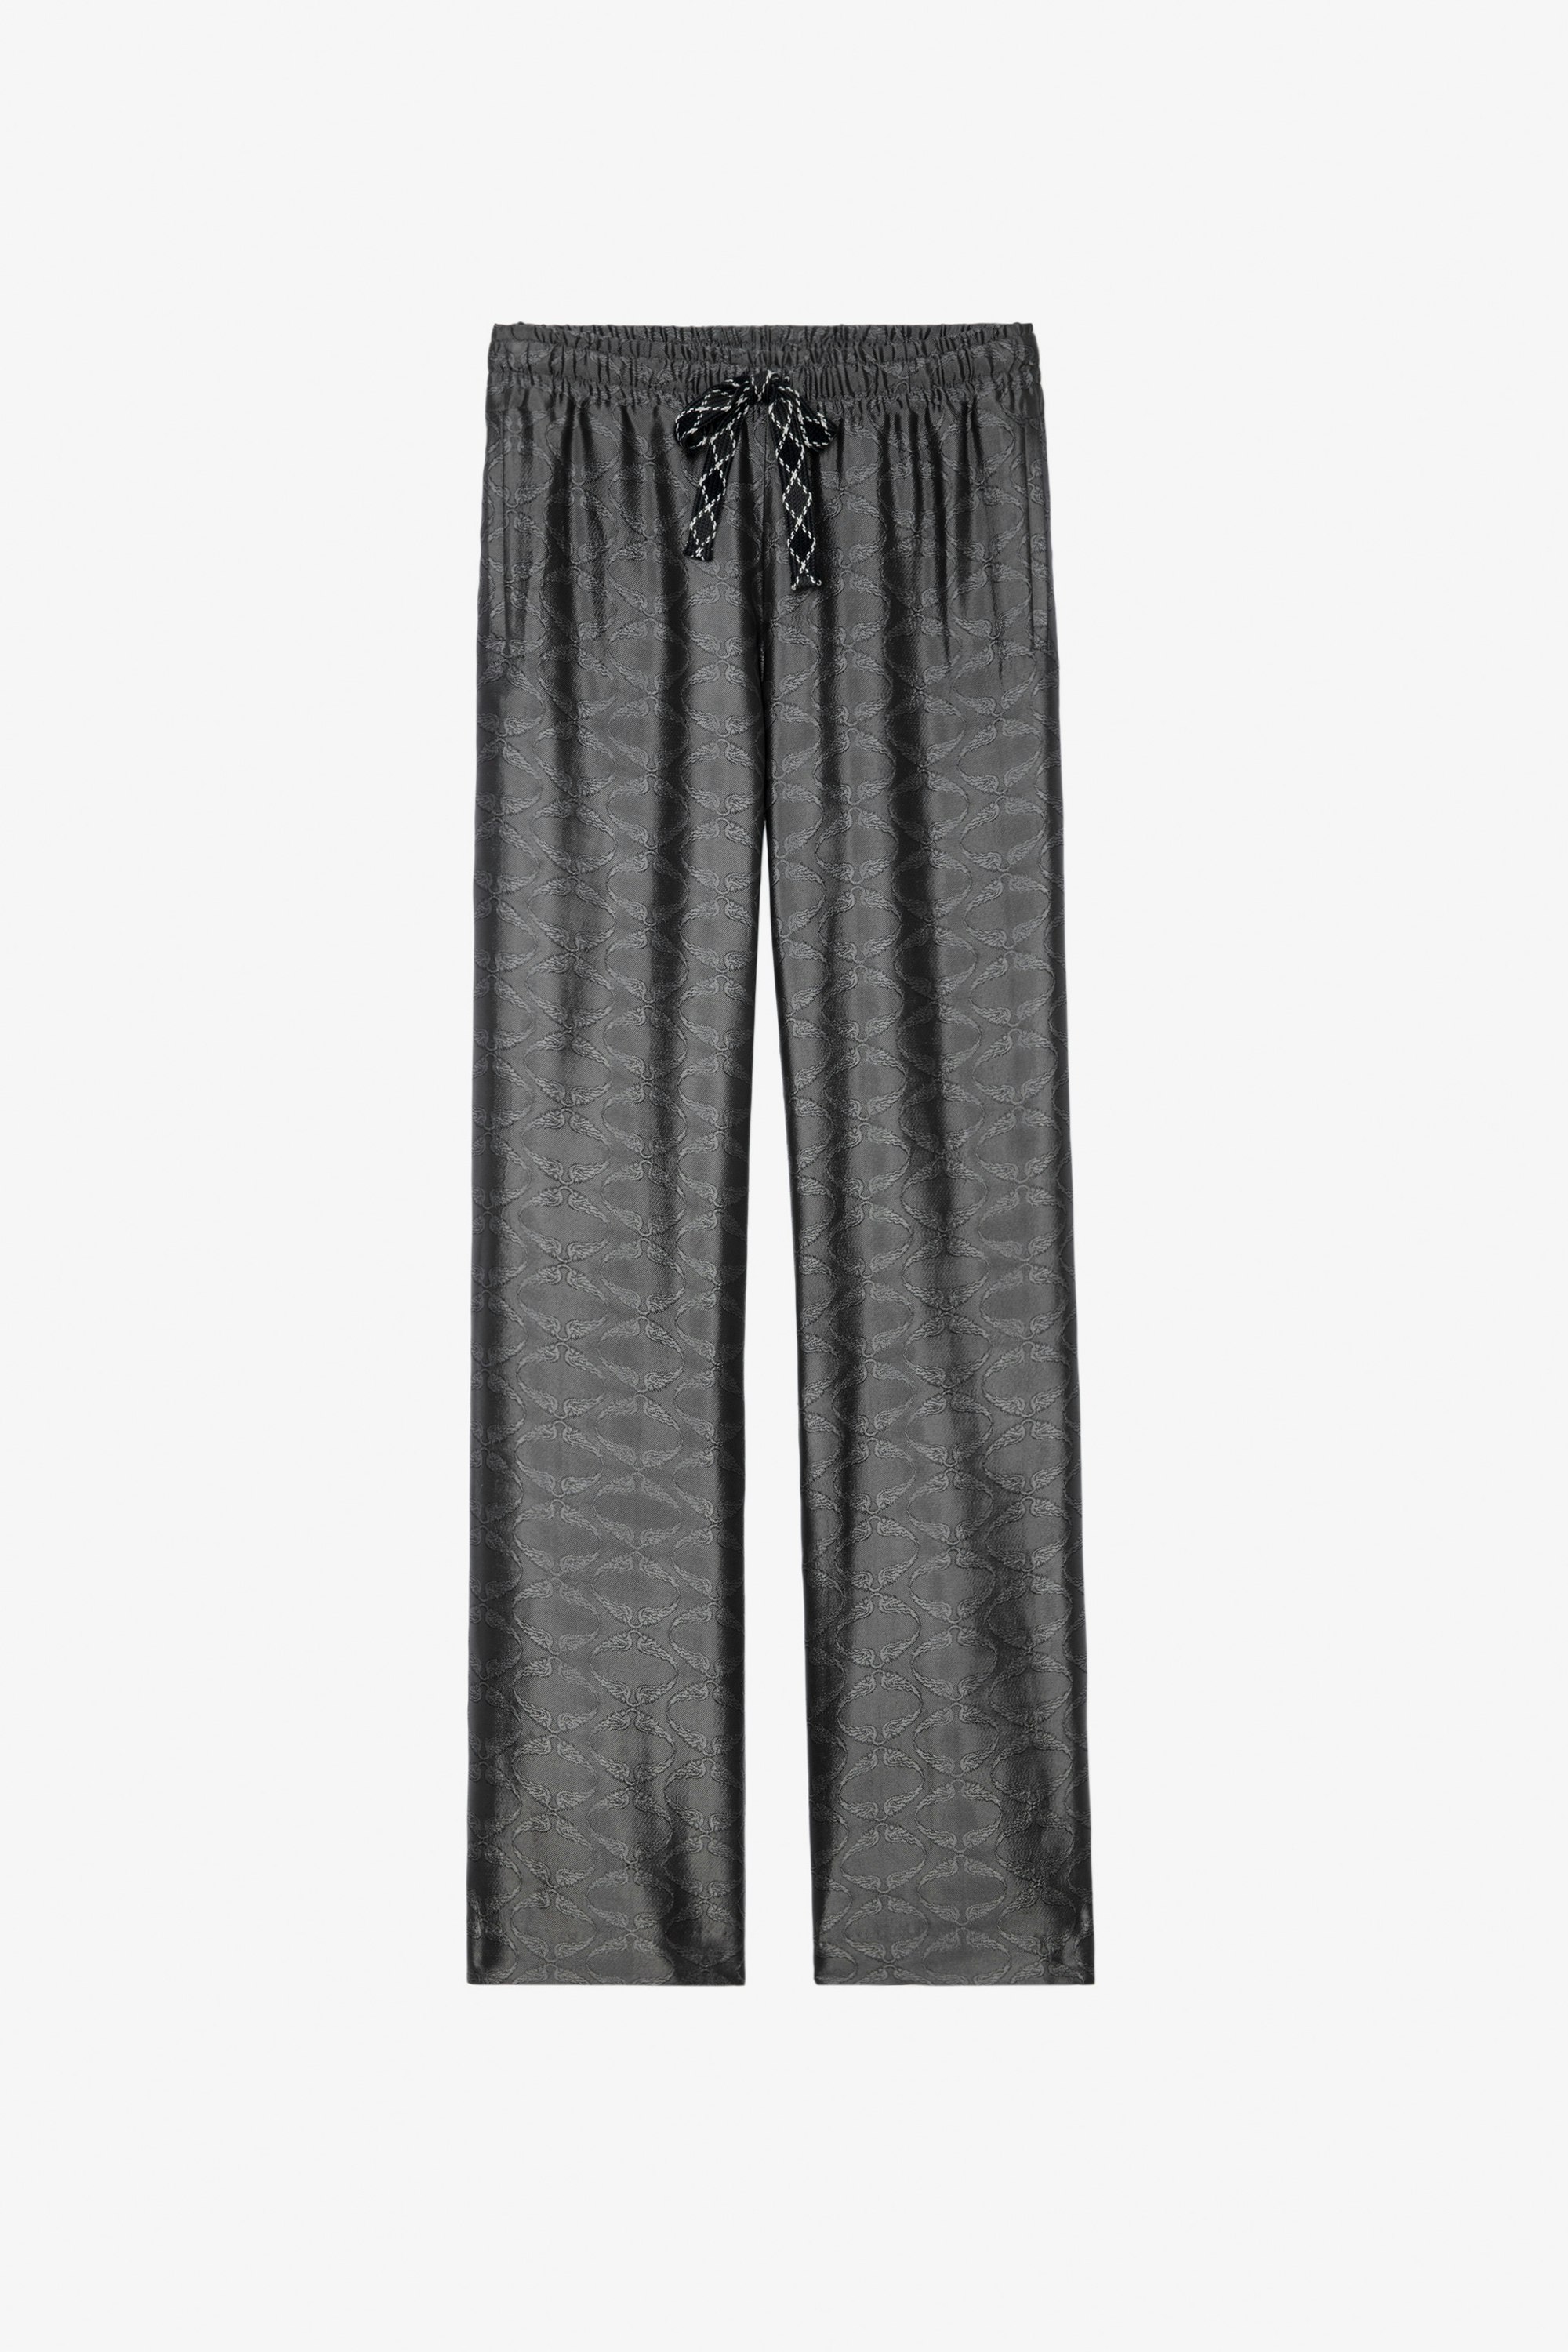 Pomy Jacquard Trousers - Women’s anthracite wing-print jacquard trousers.